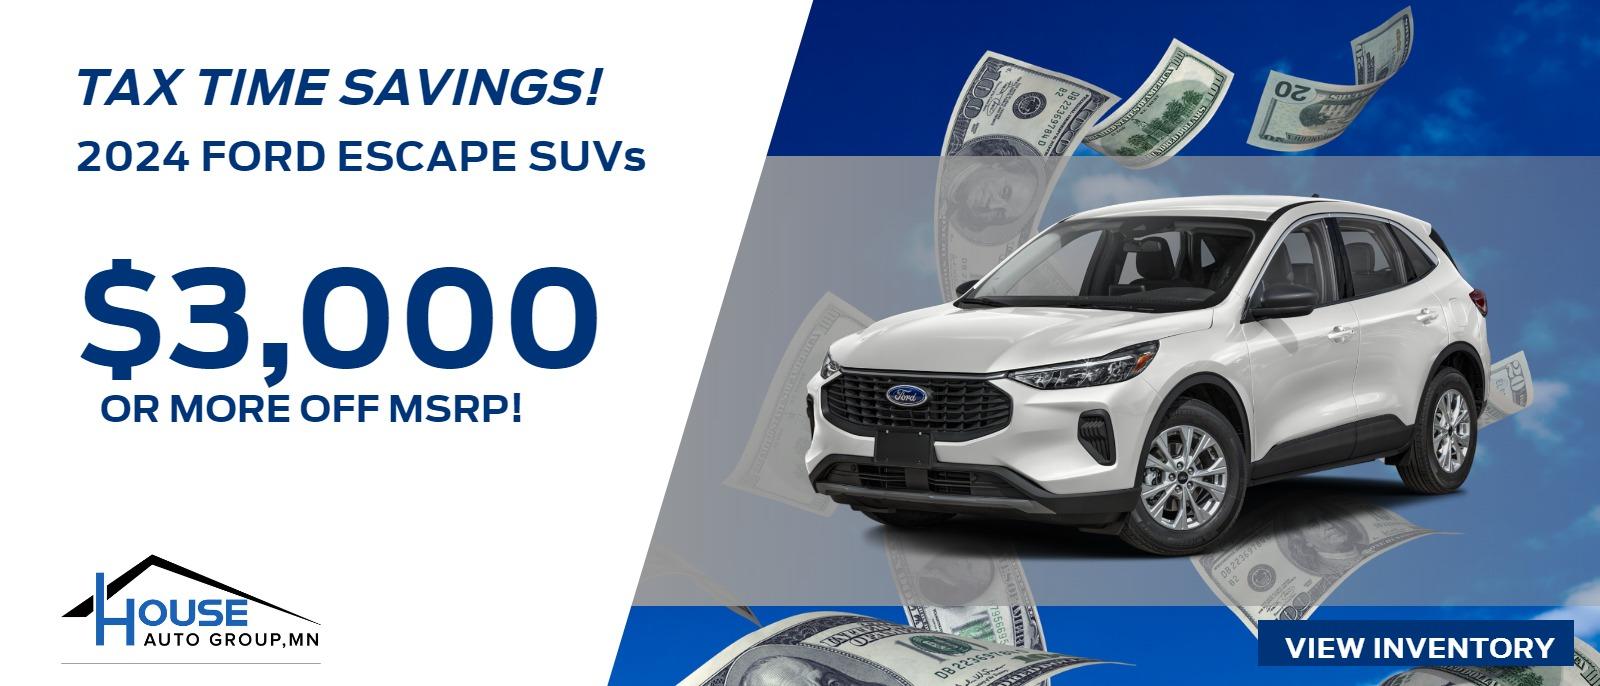 2024 Ford Escape SUVs -- $3,000 Or More Off MSRP!